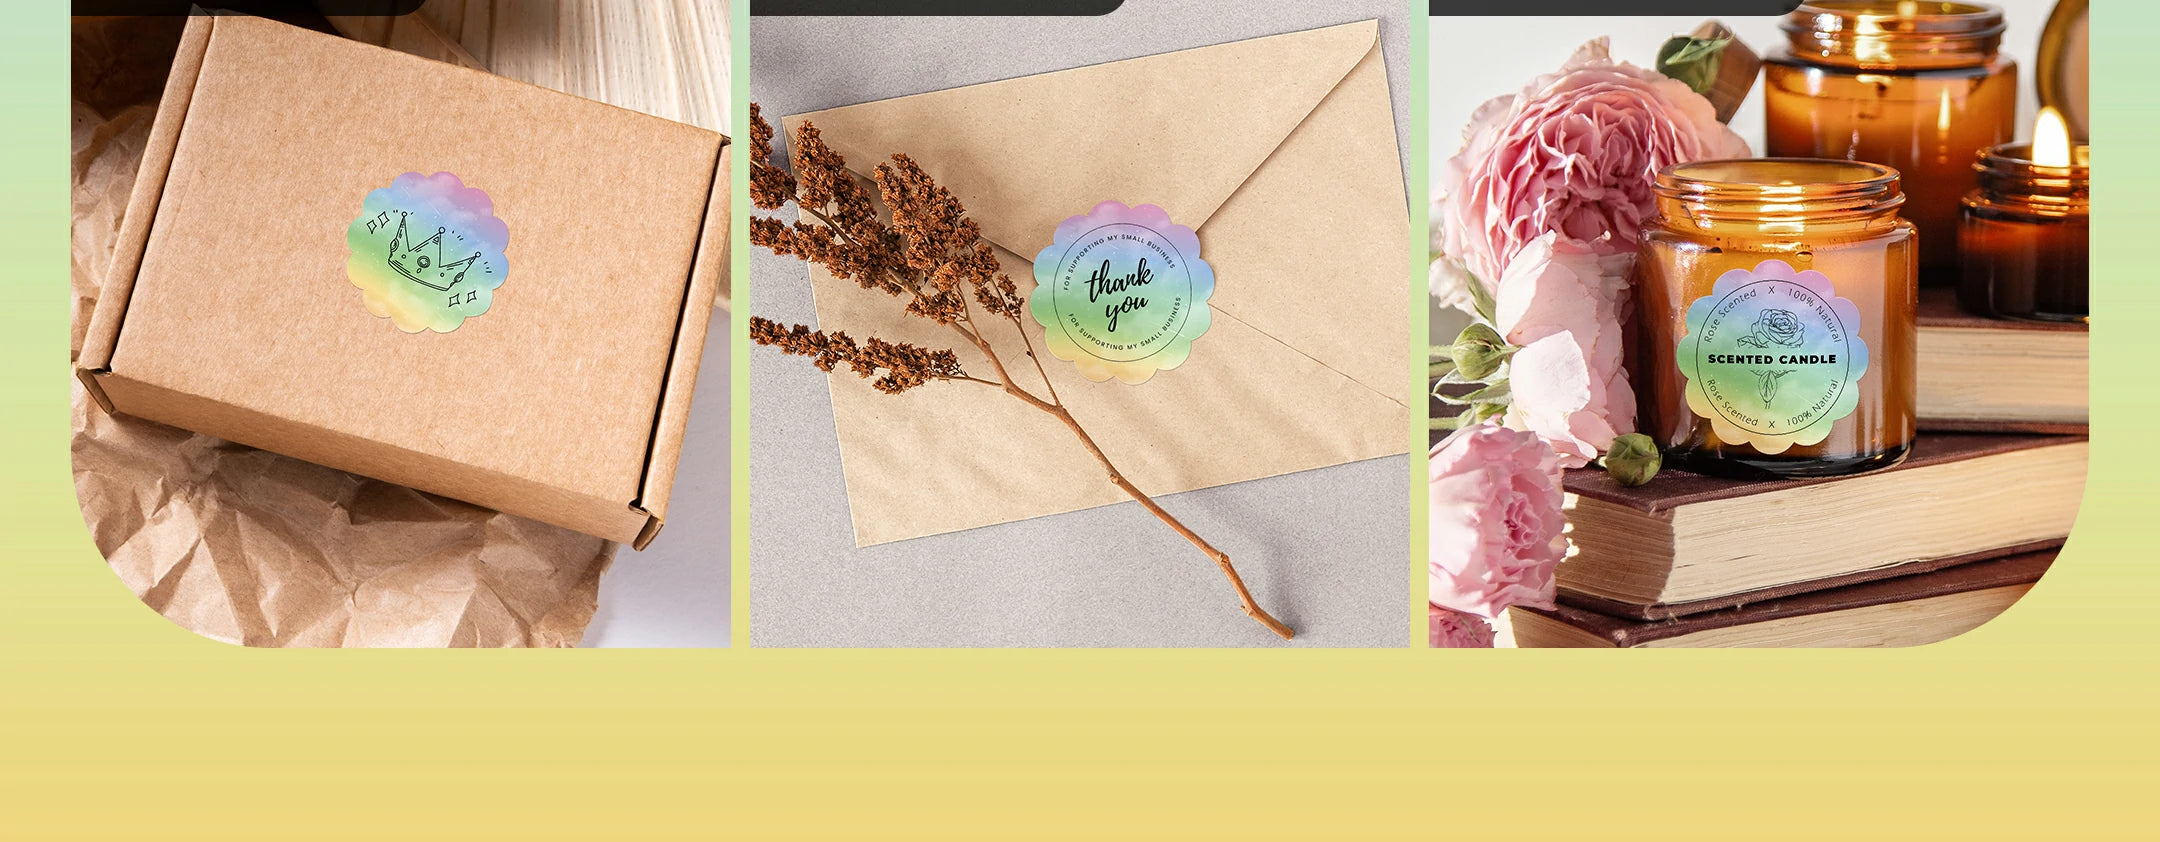 MUNBYN's watercolor square labels can be used as labels for envelopes, packages, and candle jars.